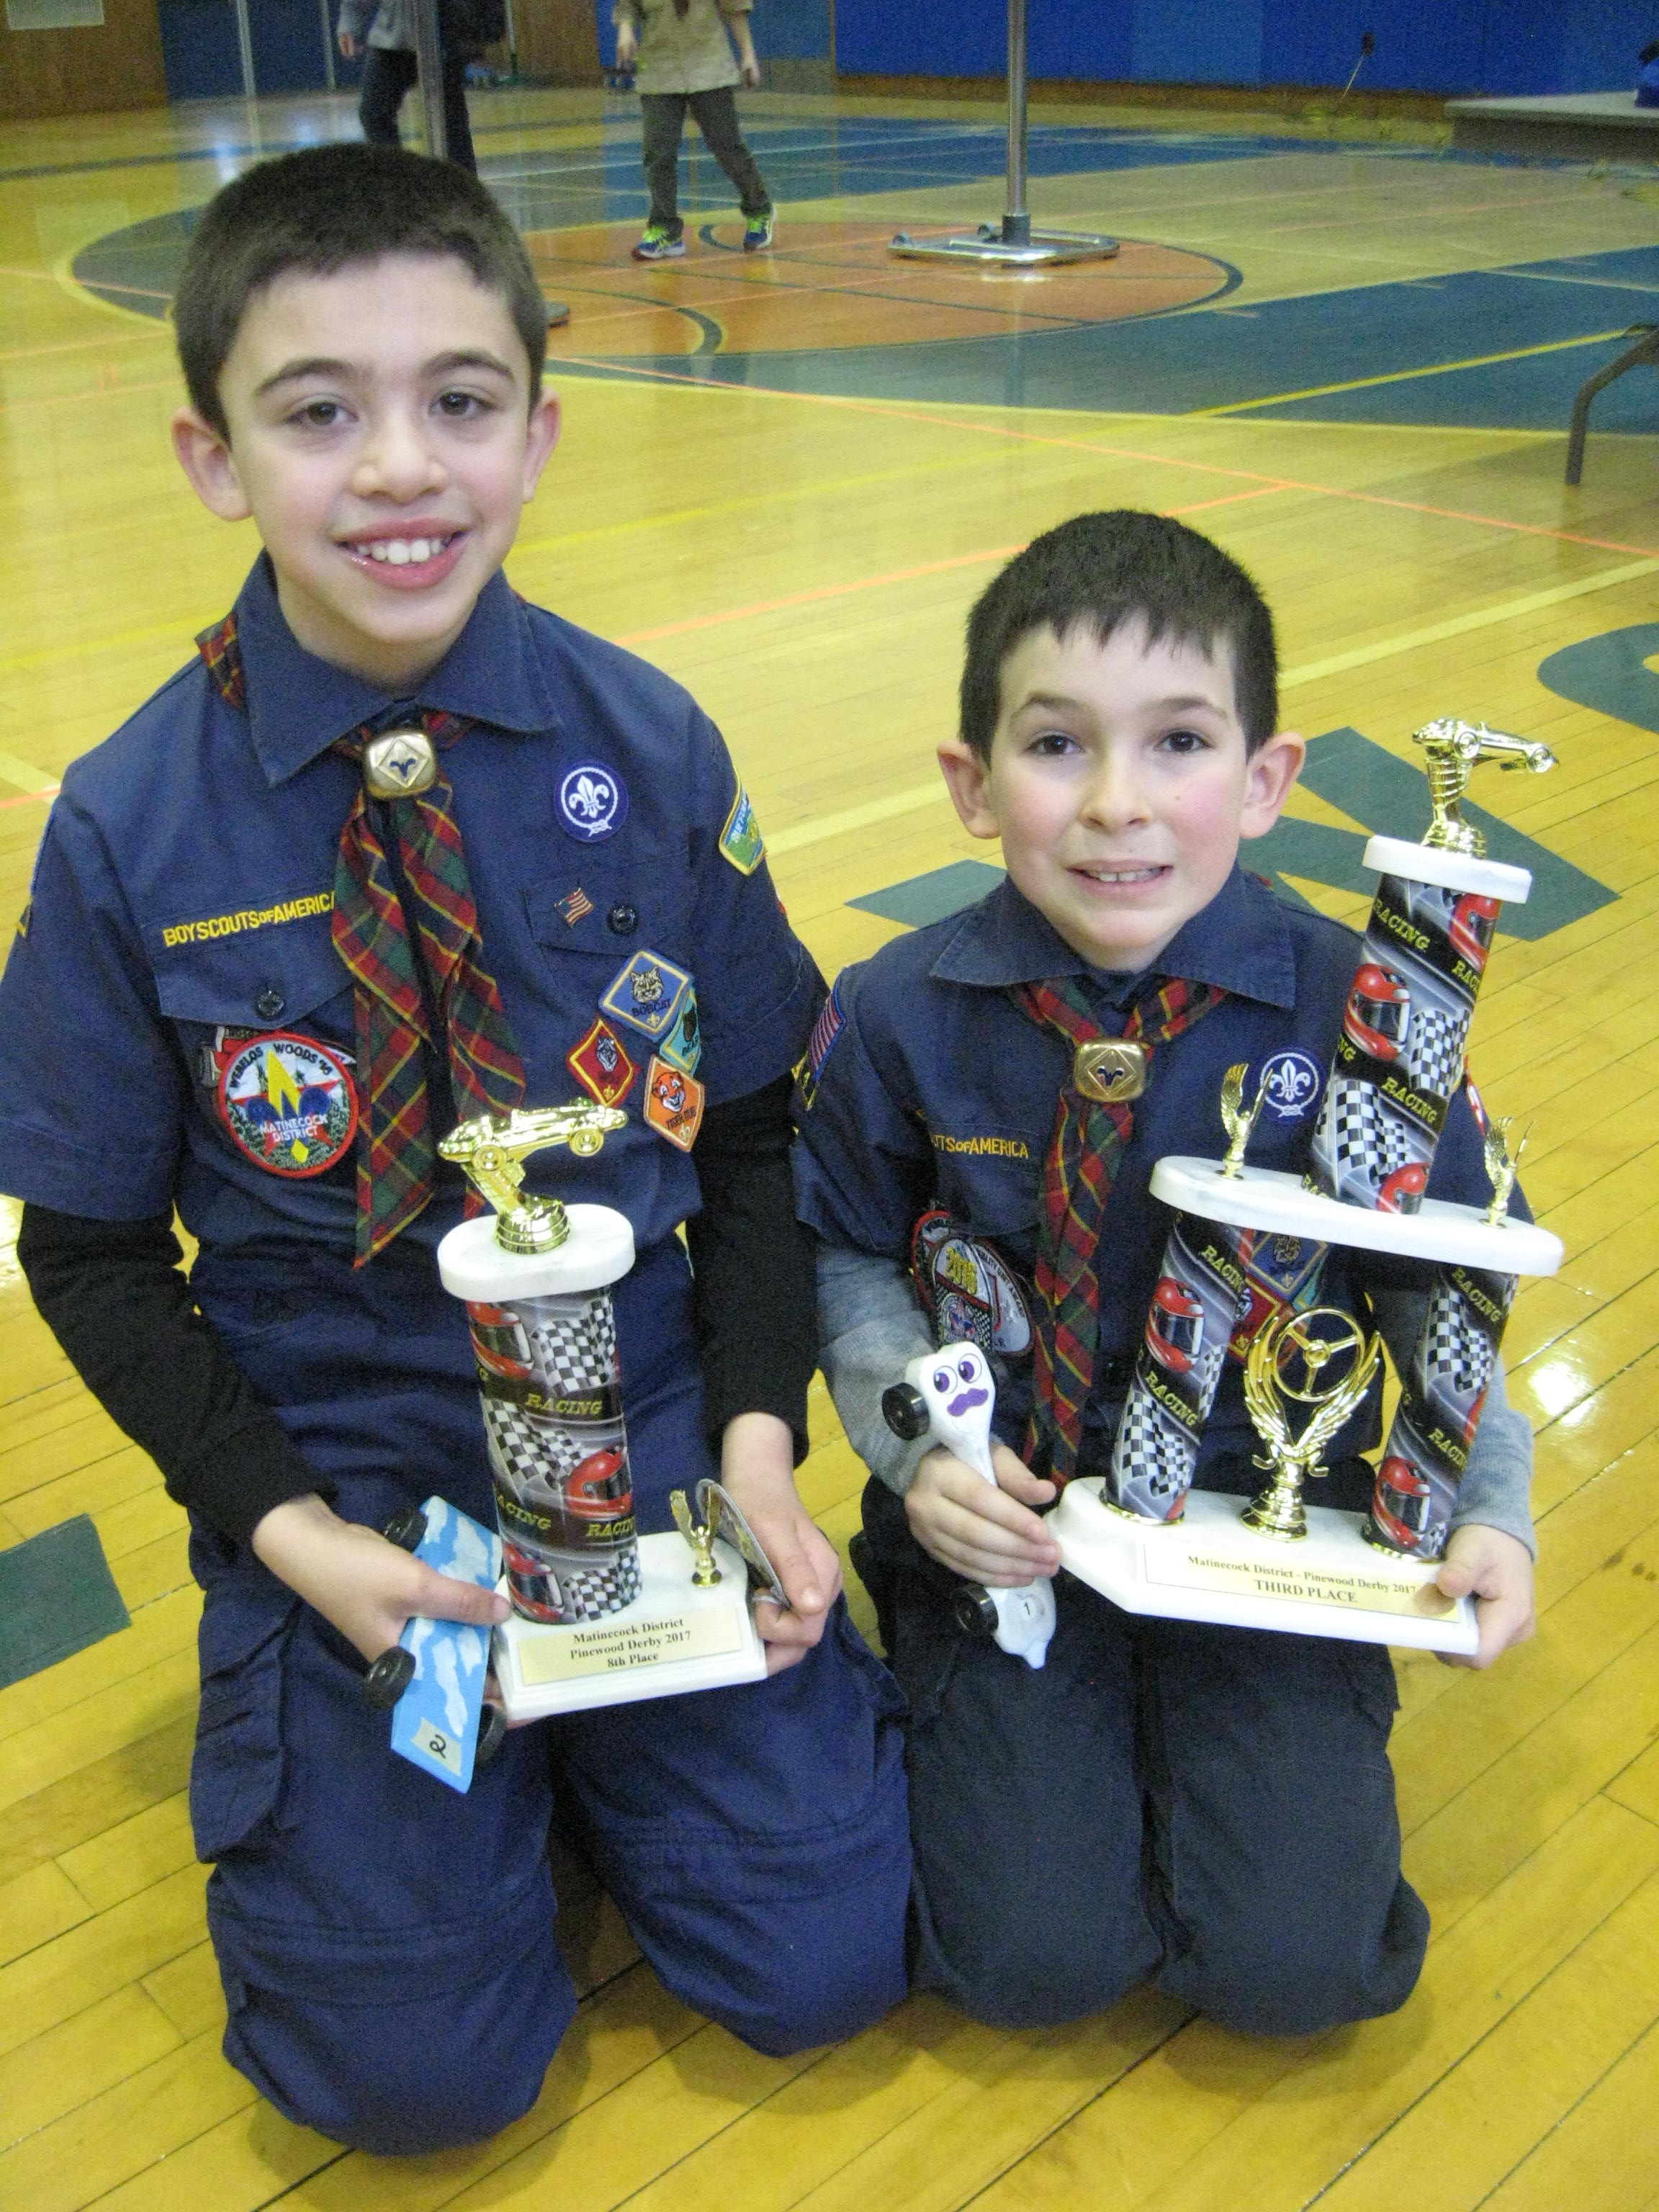  Third-place winner Mario M. Jr. and eigth-place winner Dominick S., both of East Northport’s Pack 5, 